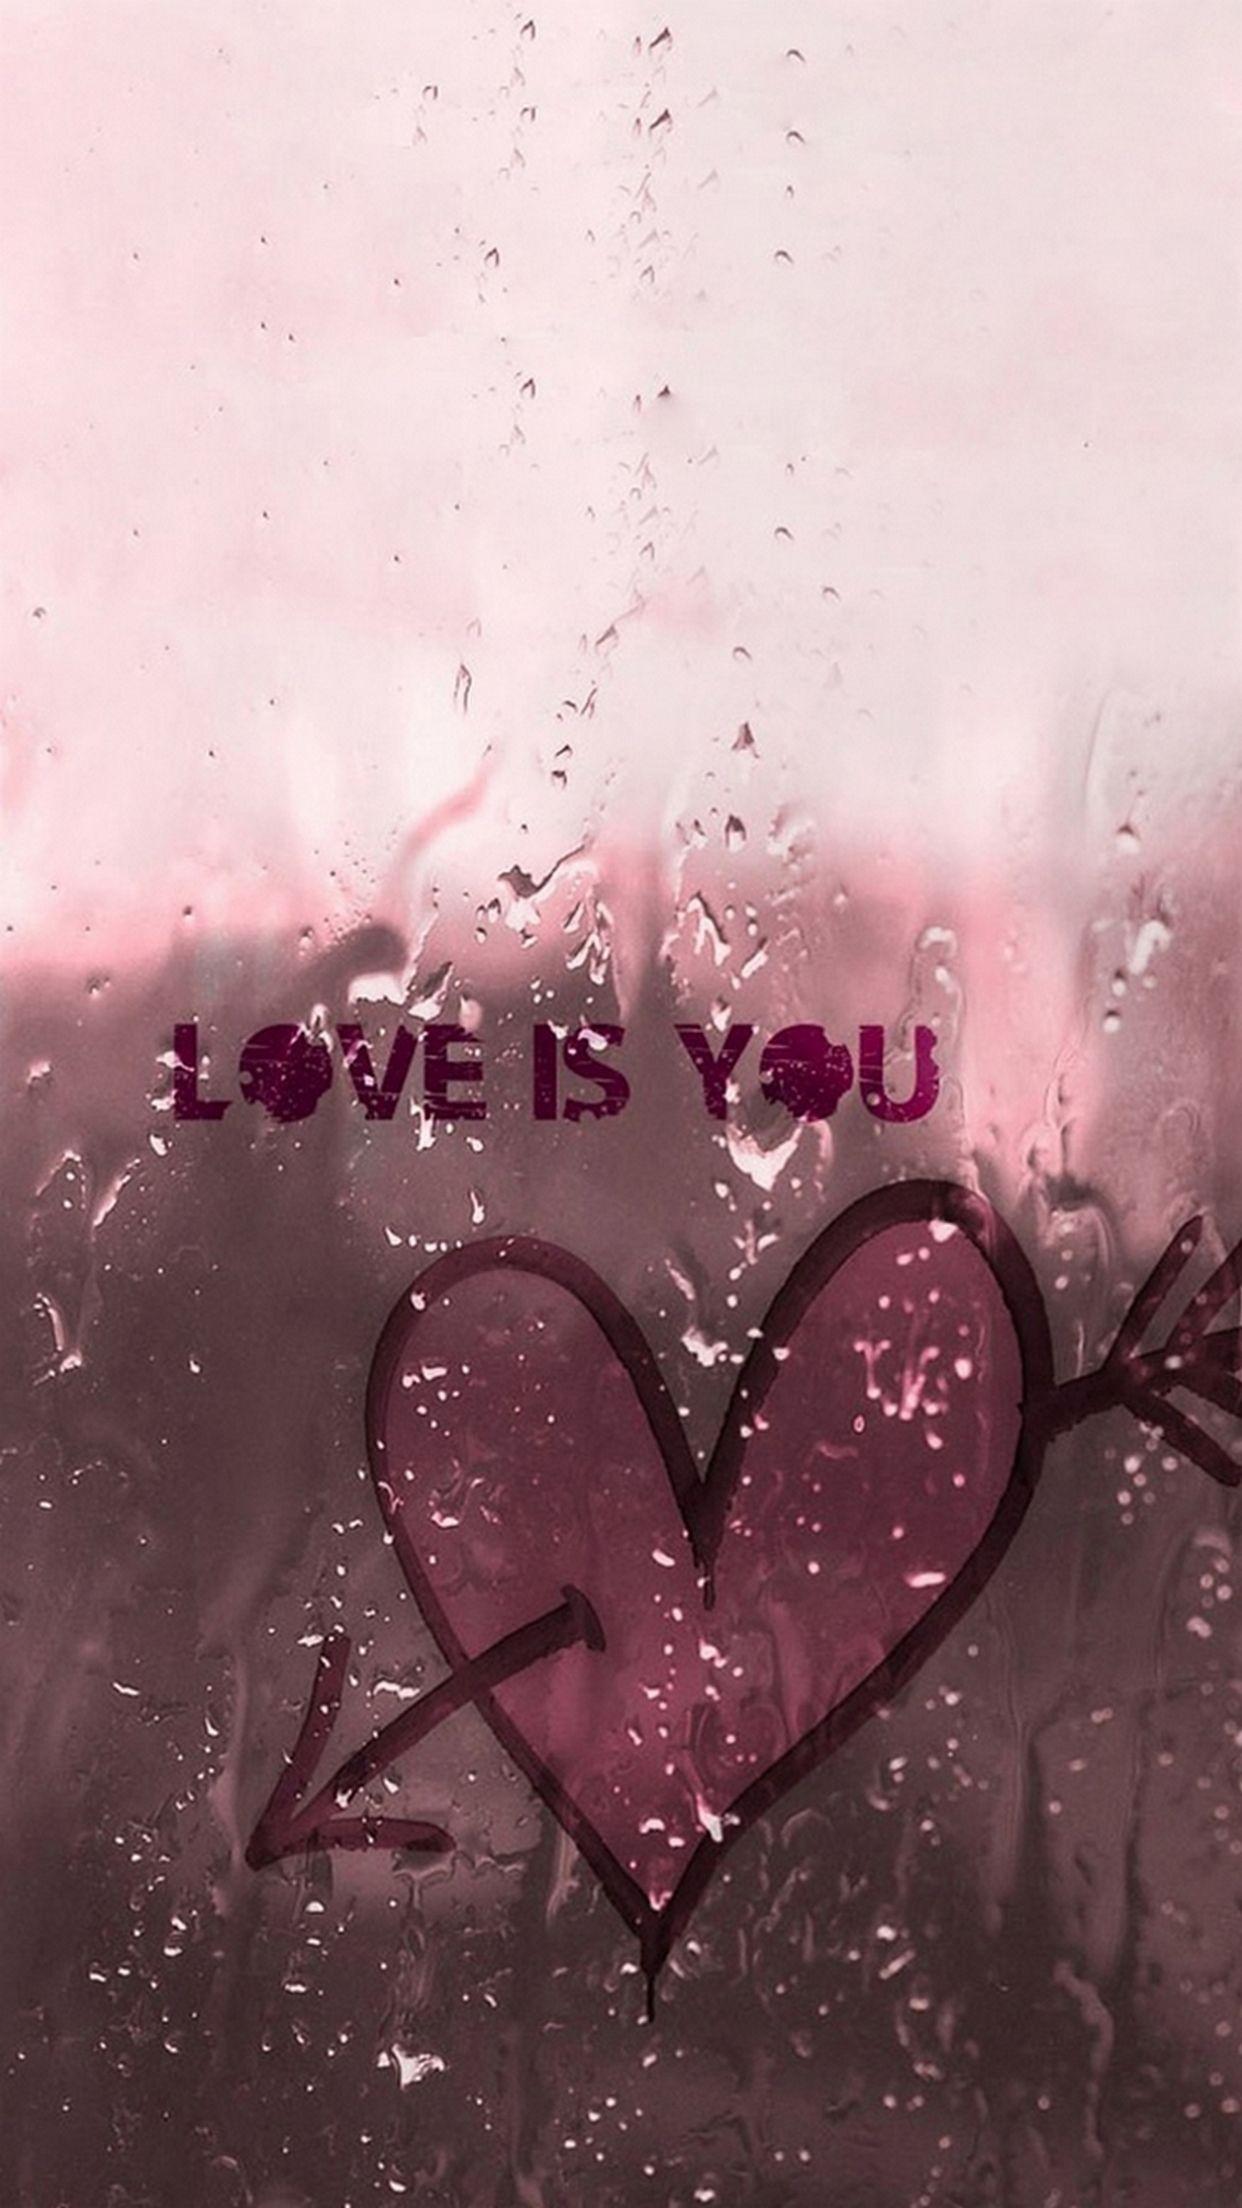 Love iPhone Wallpaper Free Love iPhone Background